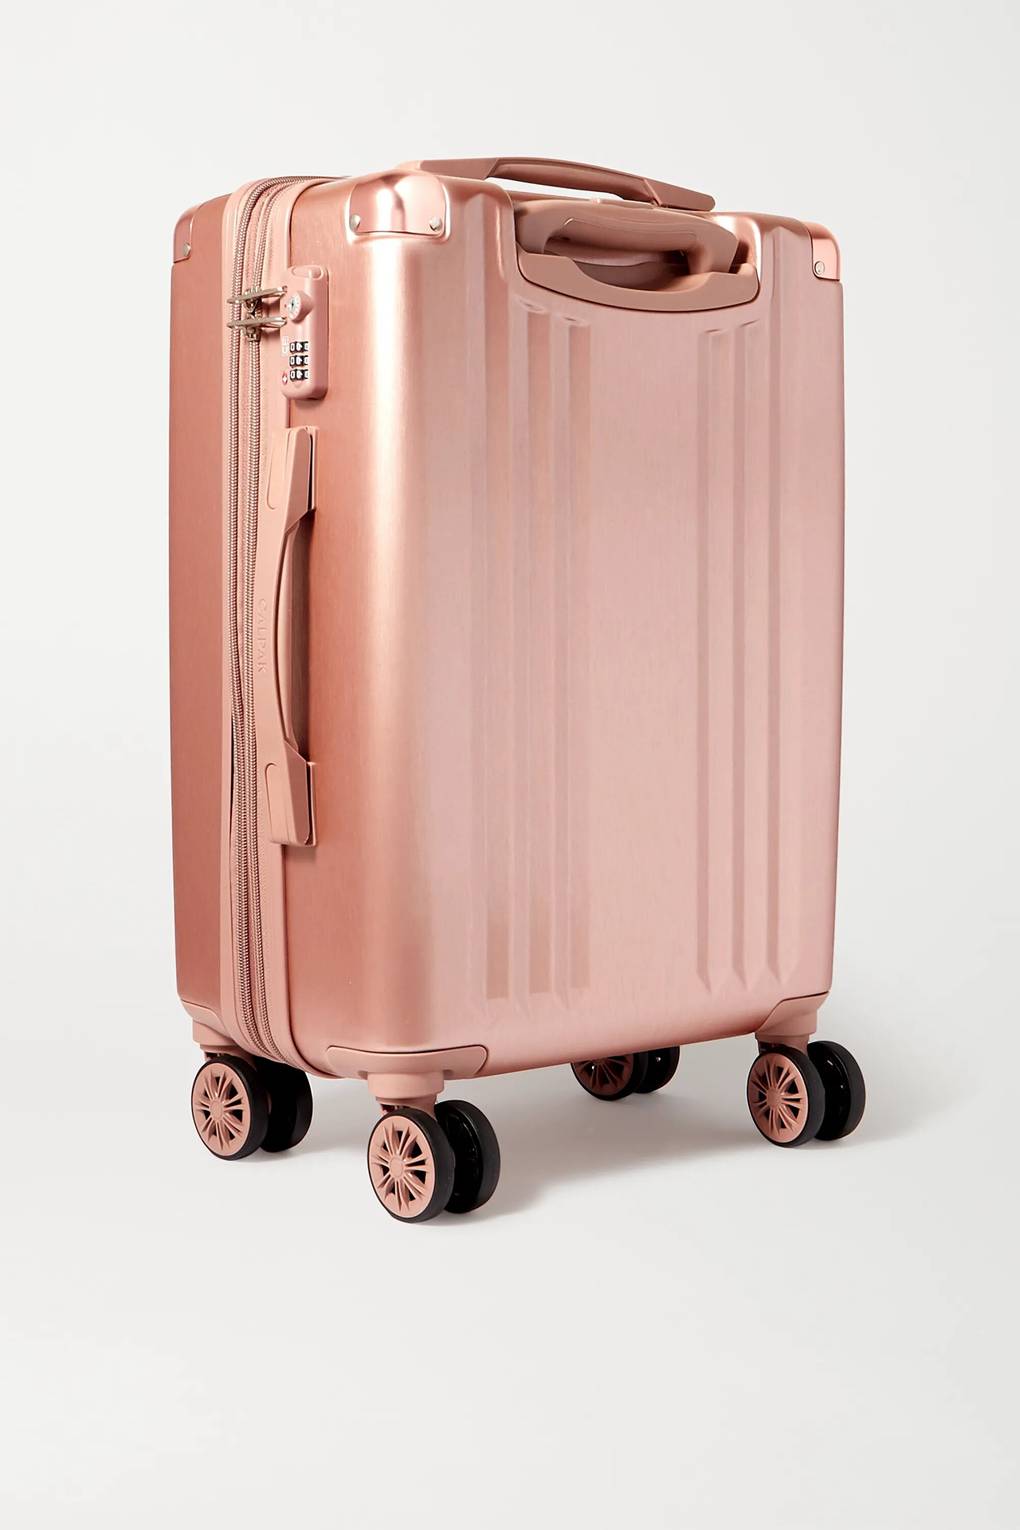 Best Suitcases For Women 2020 Travel Bags & Best Luggage Glamour UK